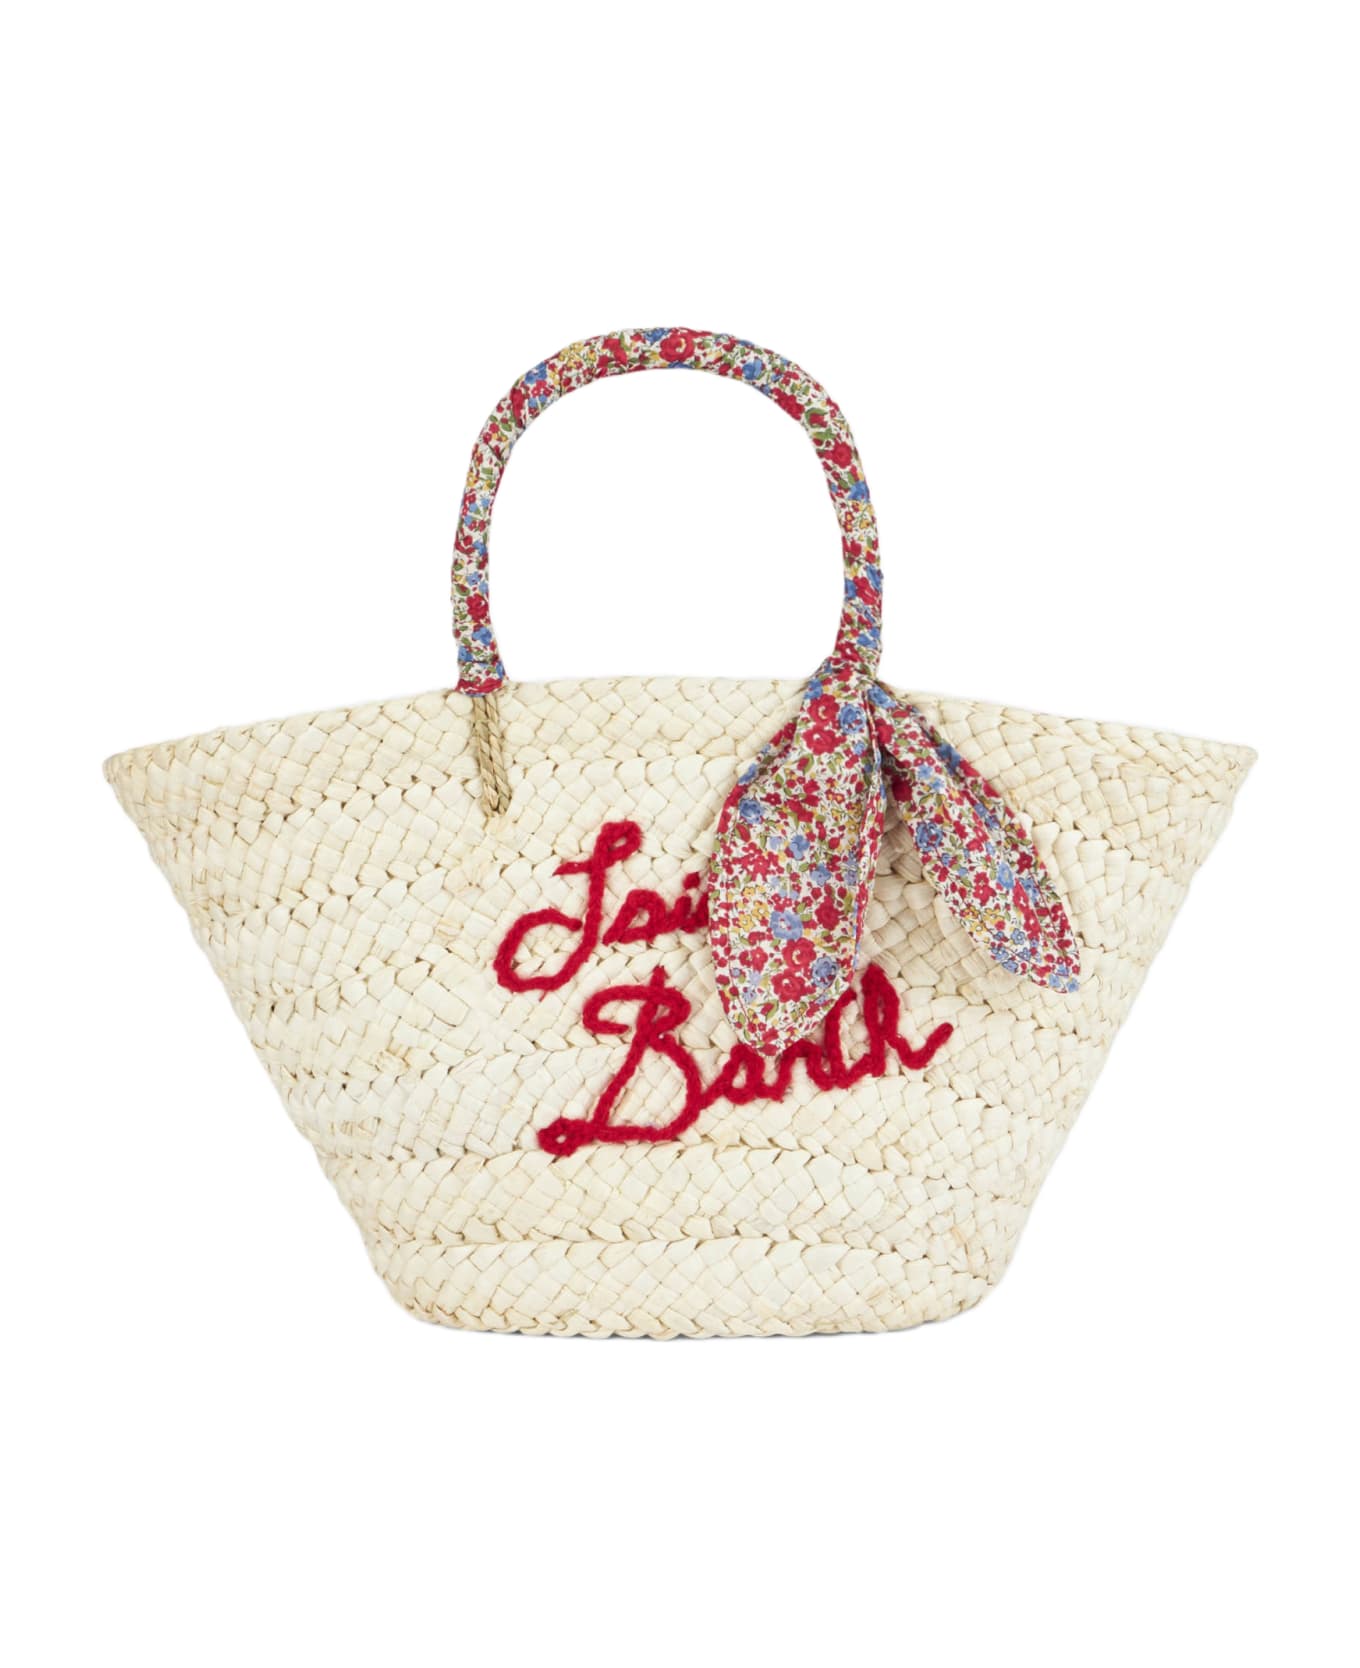 MC2 Saint Barth Woman Small Straw Bag With Embroidery - RED